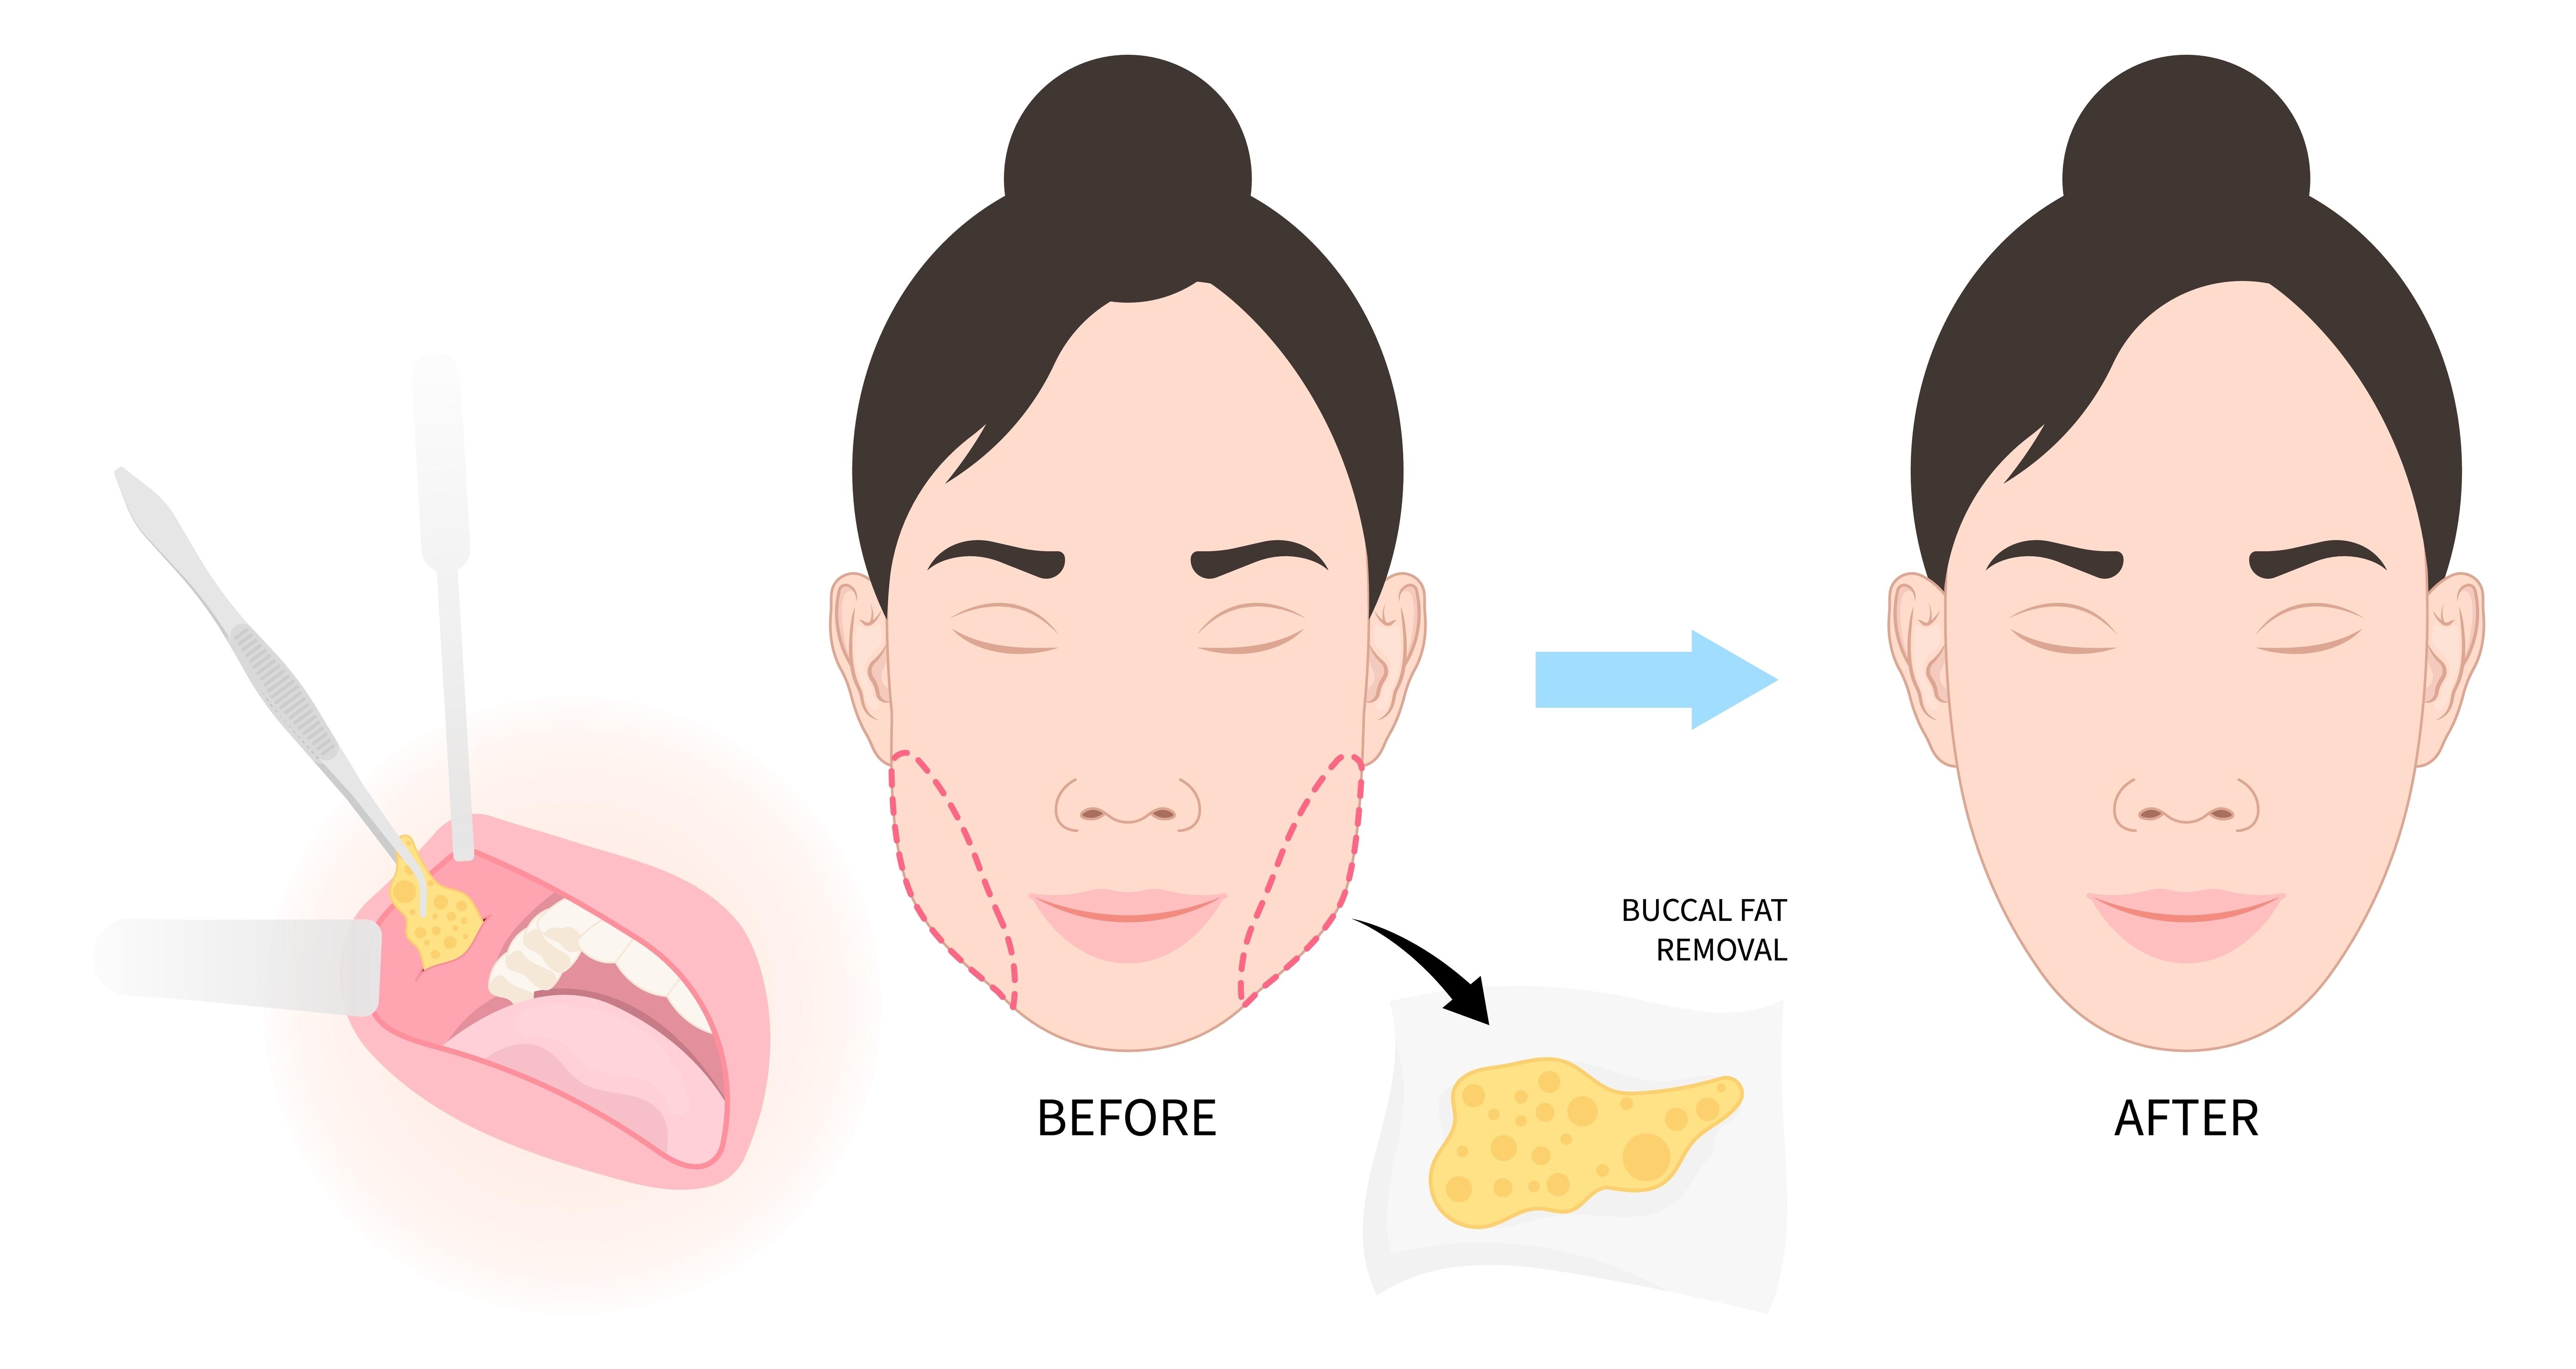 (Buccal Fat Removal)- Bichectomy